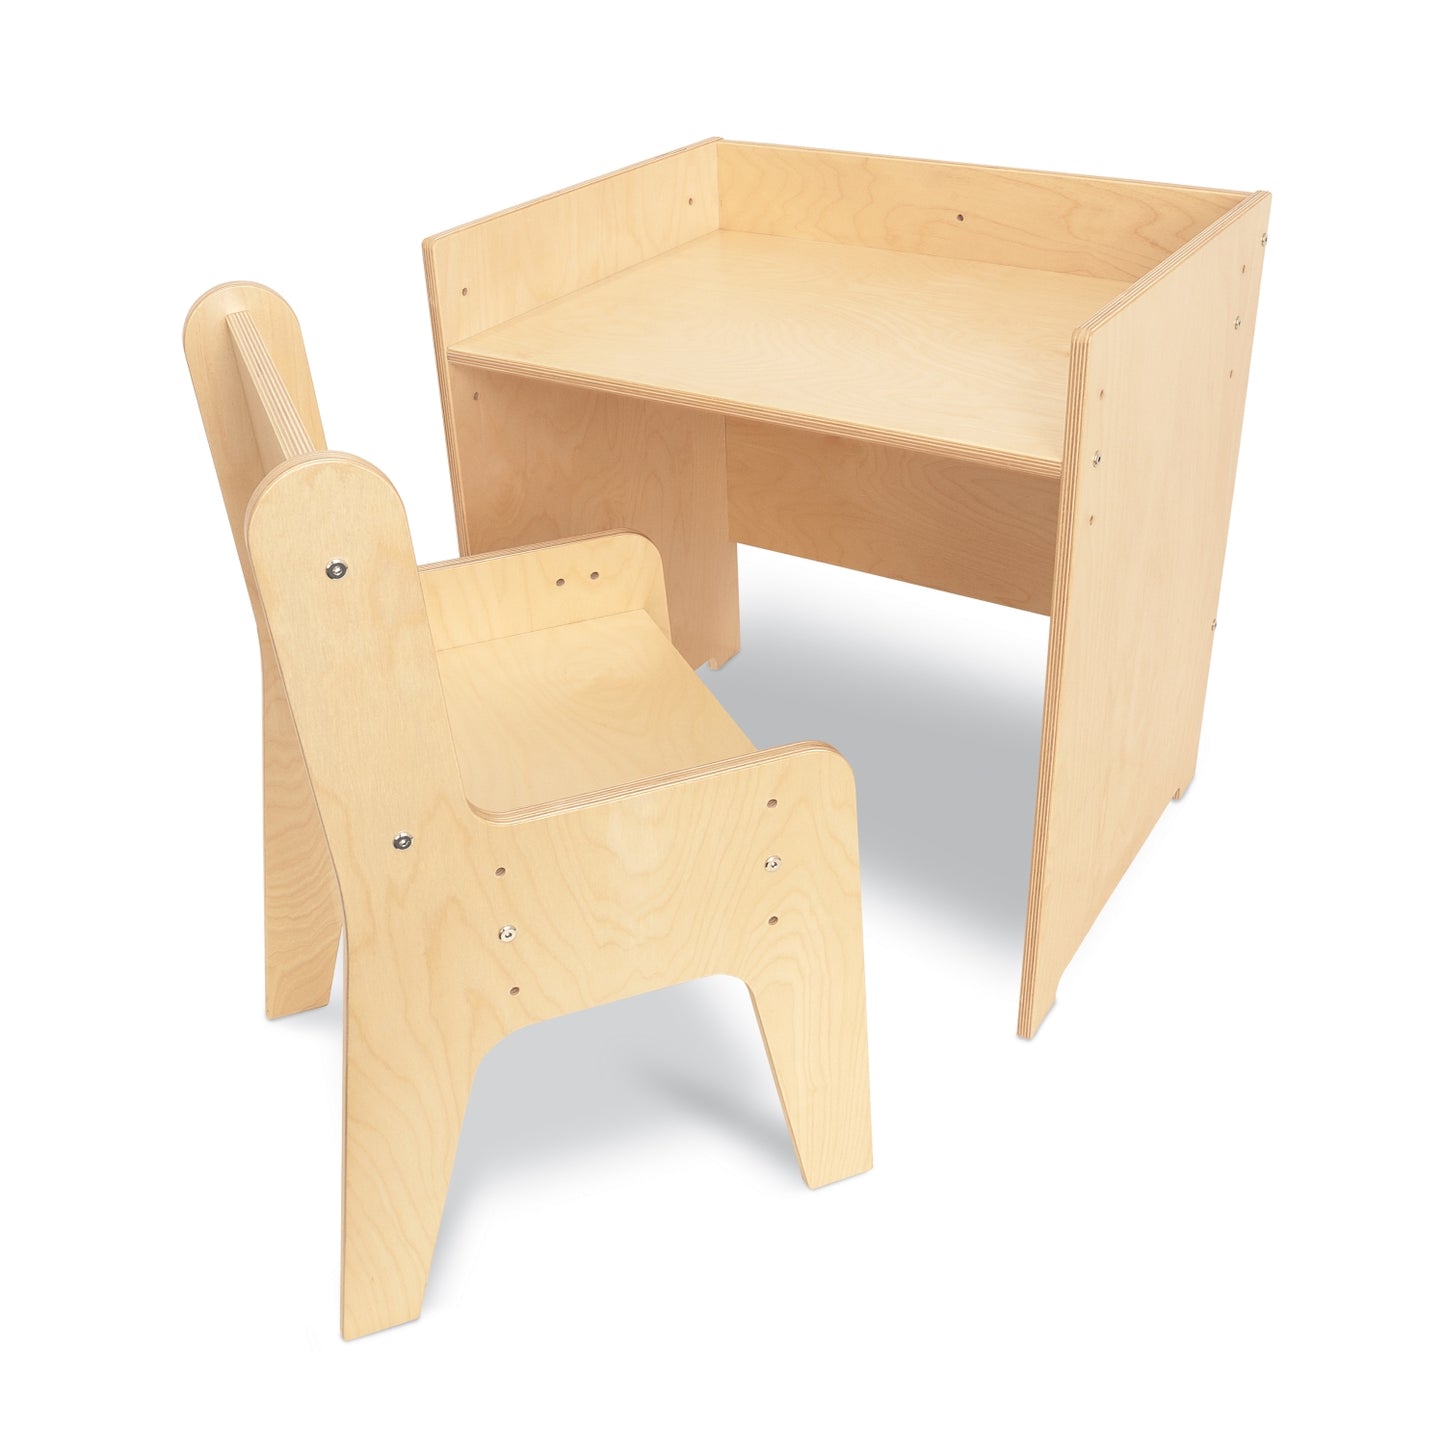 Adjustable Economy Desk and Chair Set